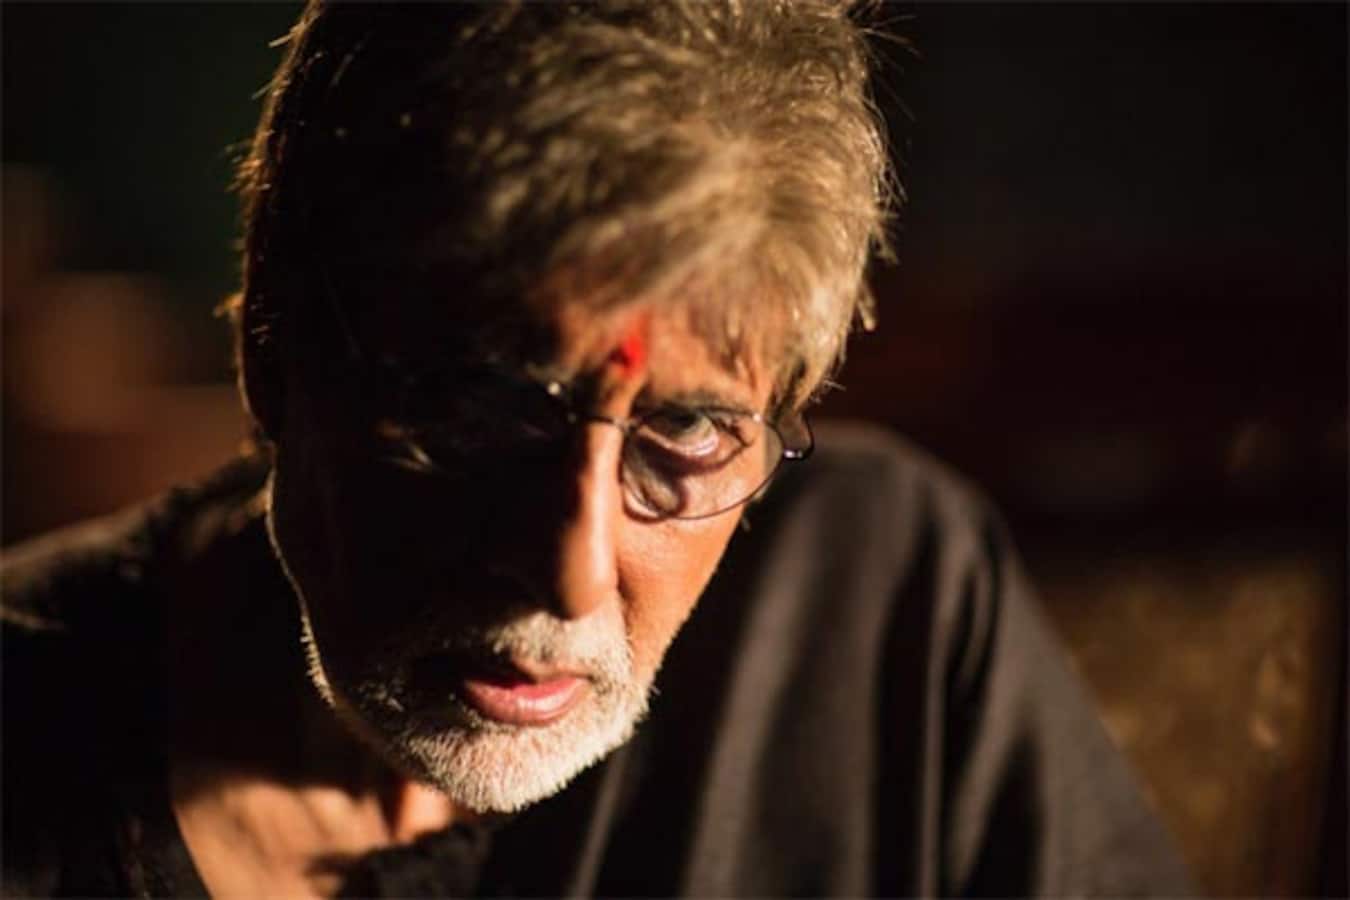 Sarkar 3 first look: Ram Gopal Varma reveals the powerful star cast of this much awaited sequel and Amitabh Bachchan is definitely a part of it